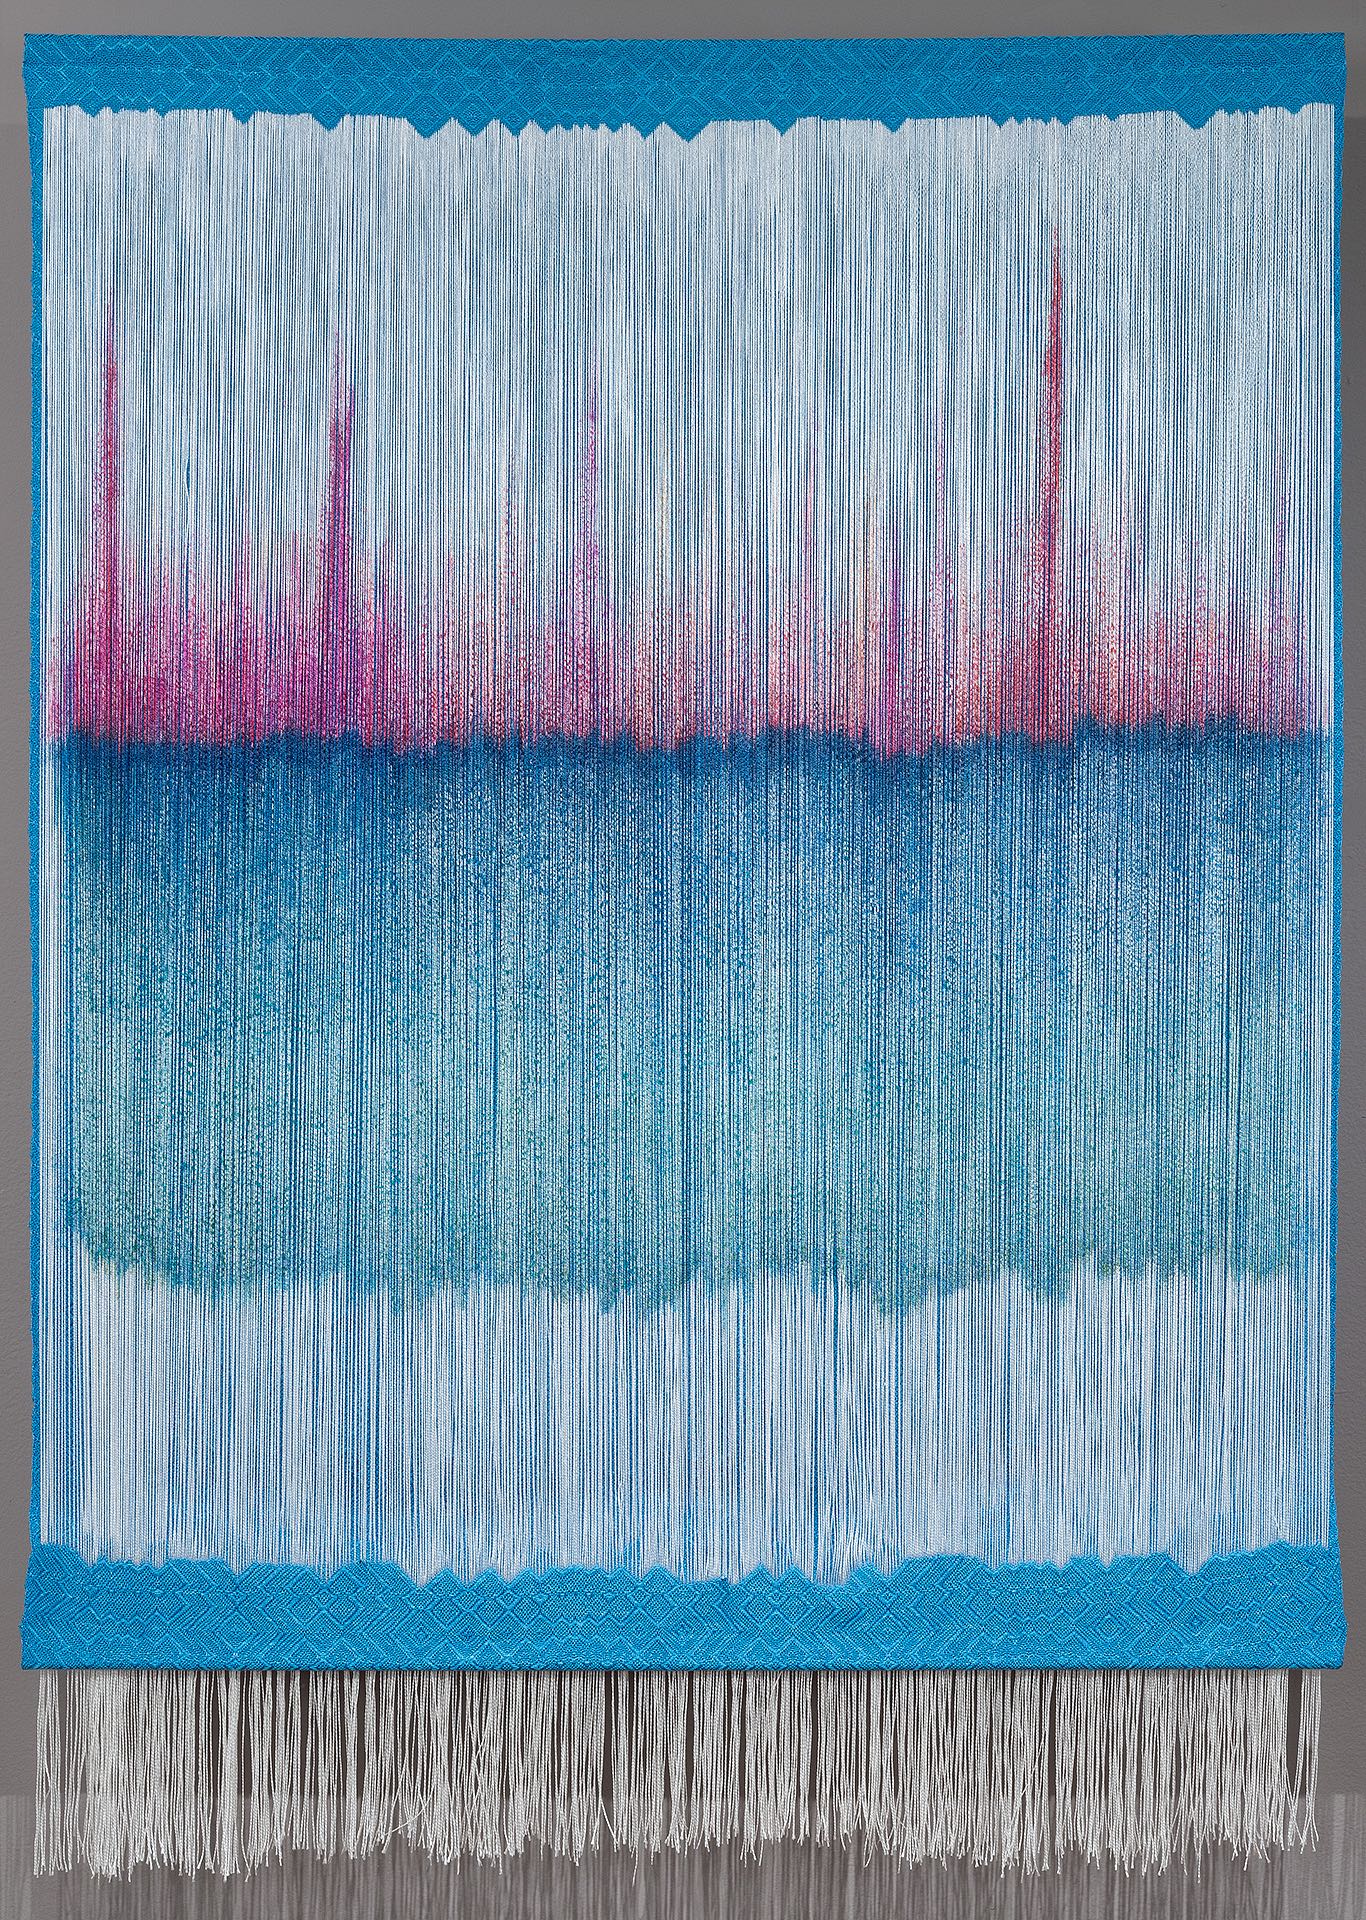  Title:  Untitled Hand-painted Warp Threads   Size: 37” wide x 50” long  Medium: Hand-painted, hand-woven  Materials: tencel  For process information and pricing, please contact us by clicking on this  link .   